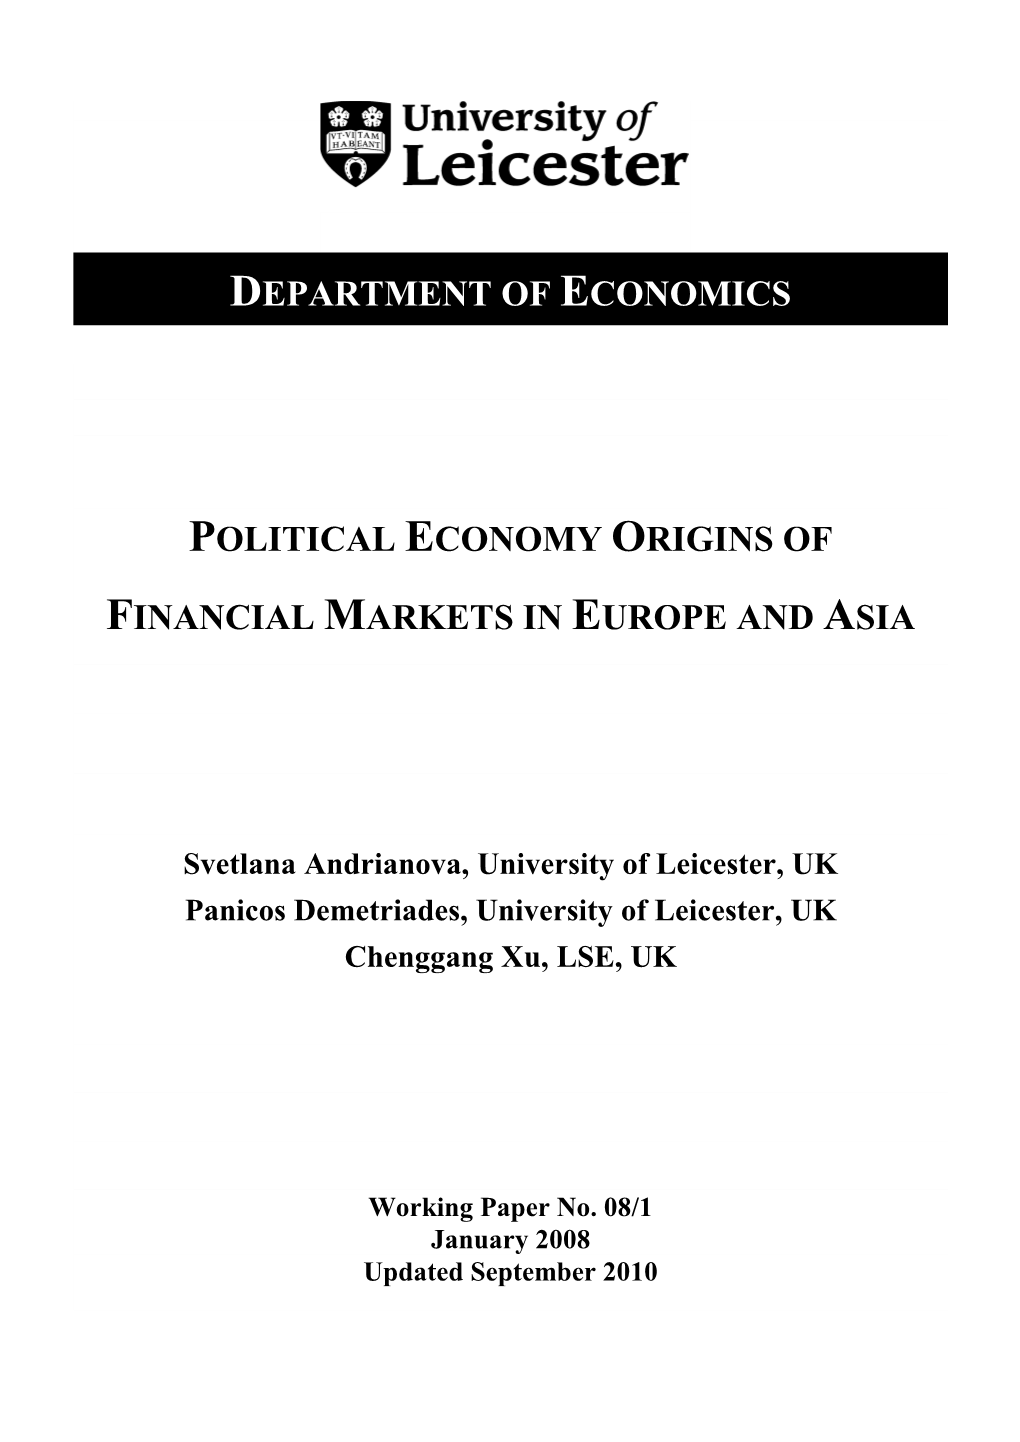 Political Economy Origins of Financial Markets in Europe and Asia∗